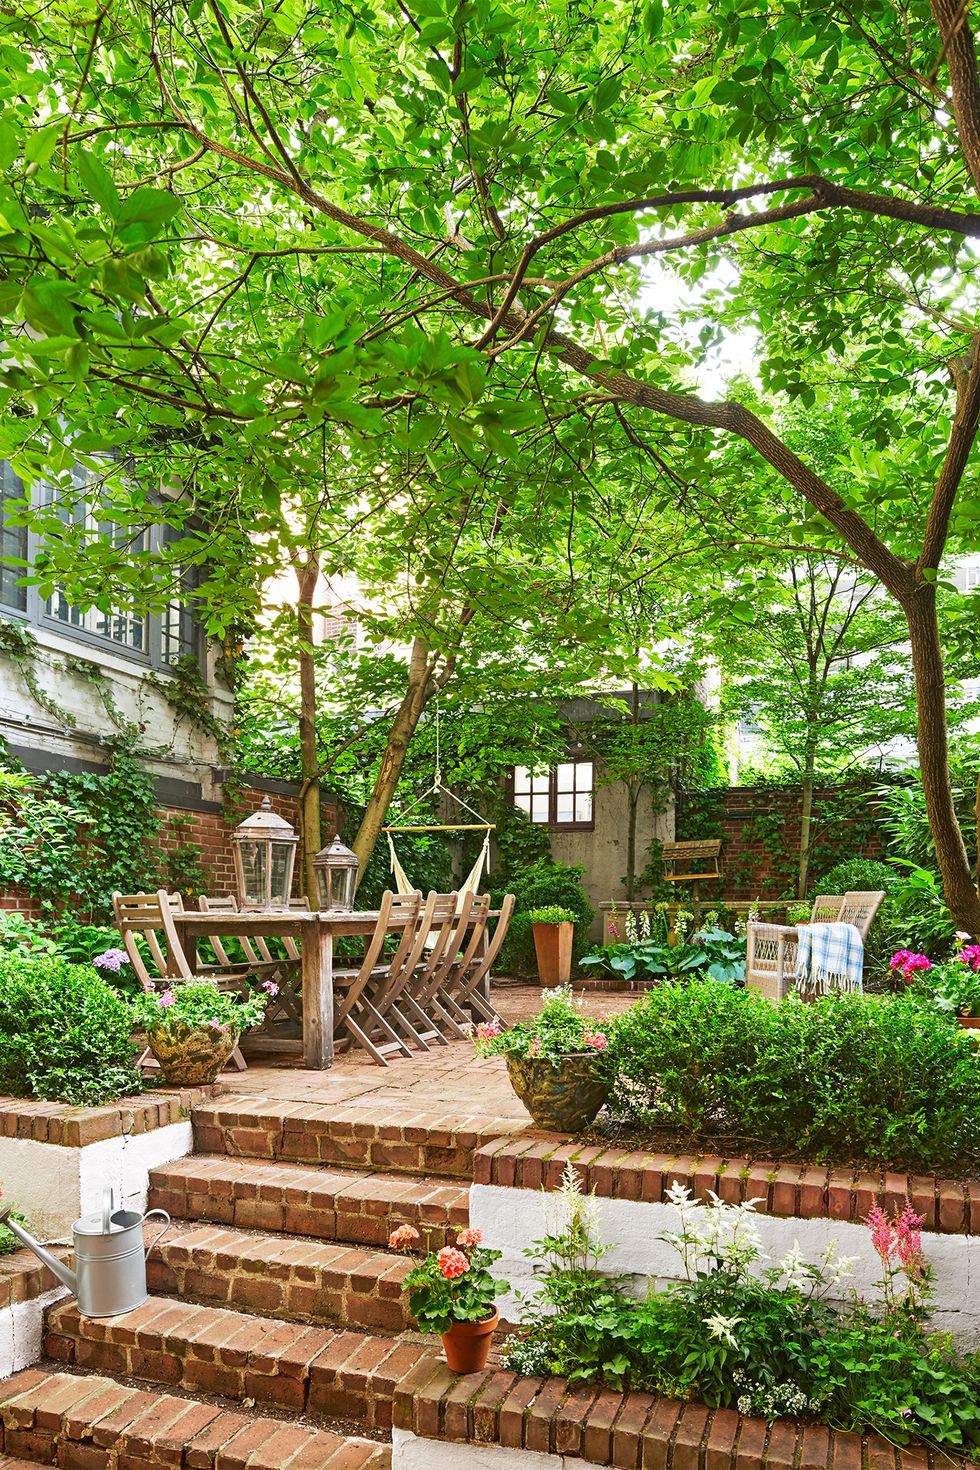 Transform Your Outdoor Space with Stunning Backyard Landscaping Ideas